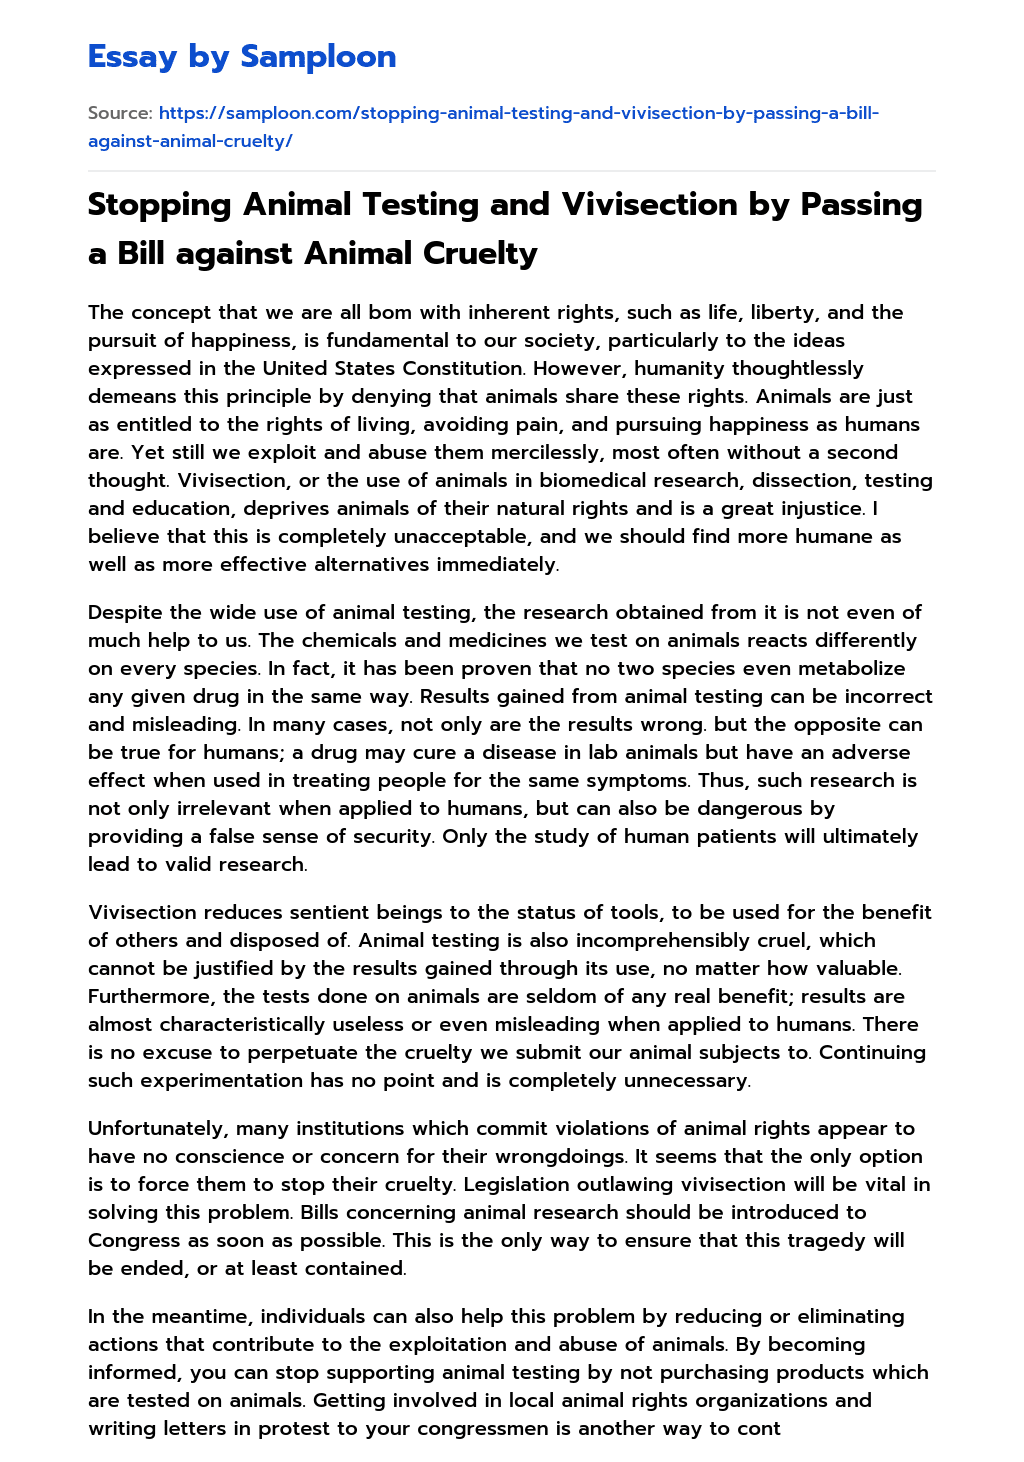 Stopping Animal Testing and Vivisection by Passing a Bill against Animal Cruelty essay